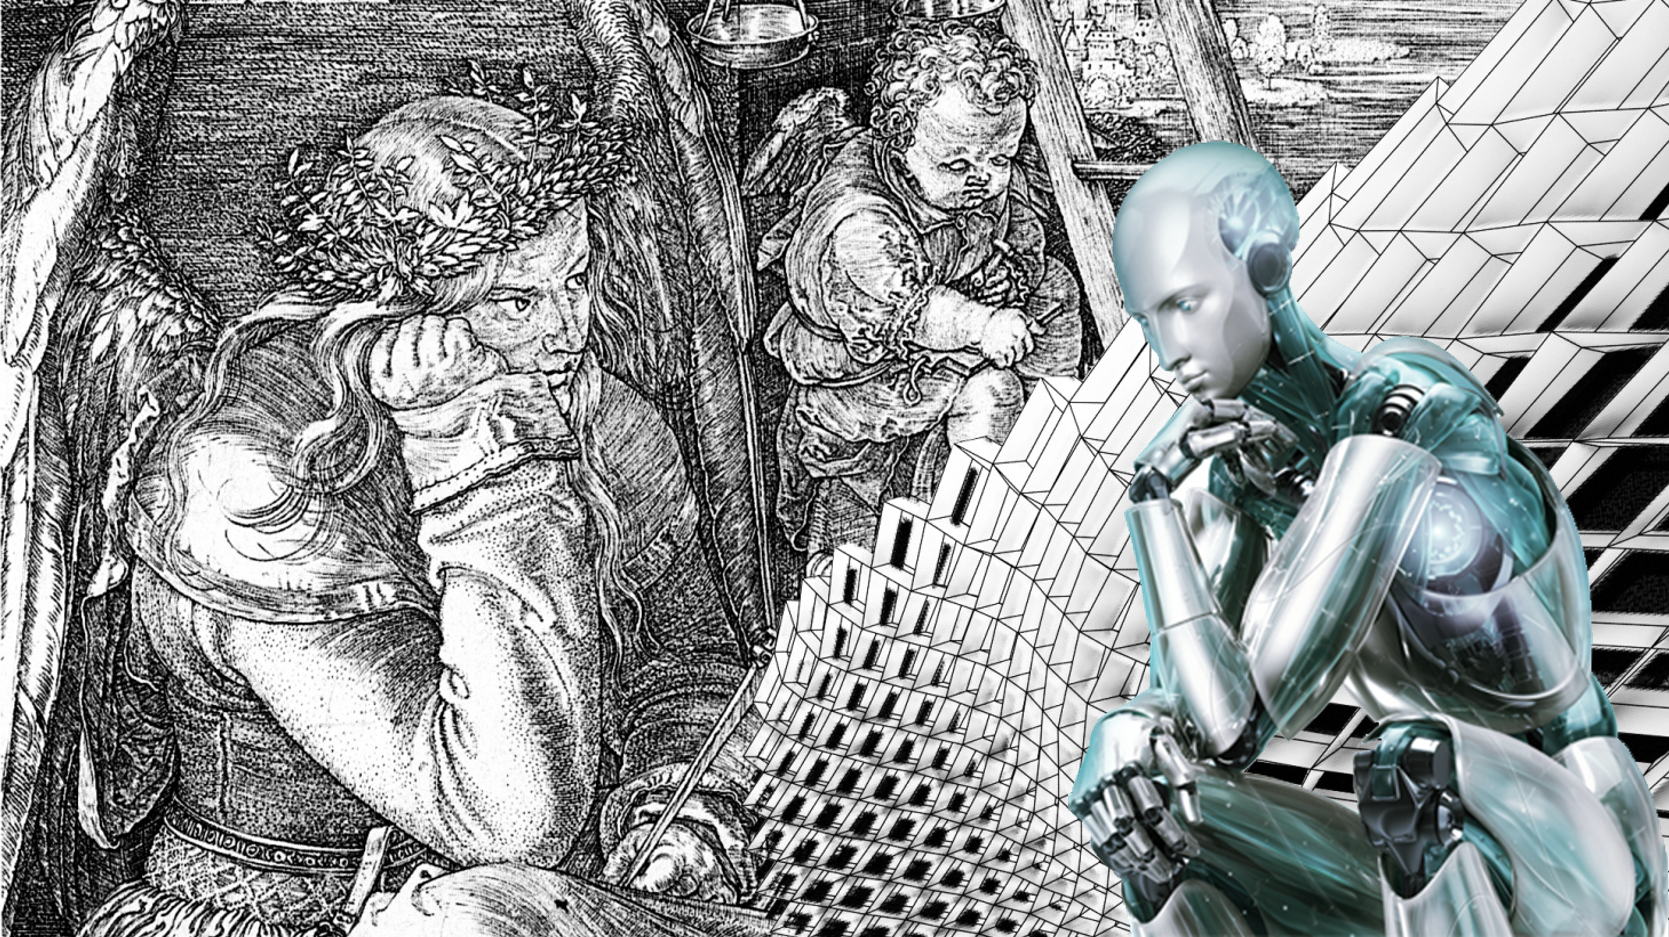 [Translate to English:] retouched photo of a person in an old drawing facing an AI robot